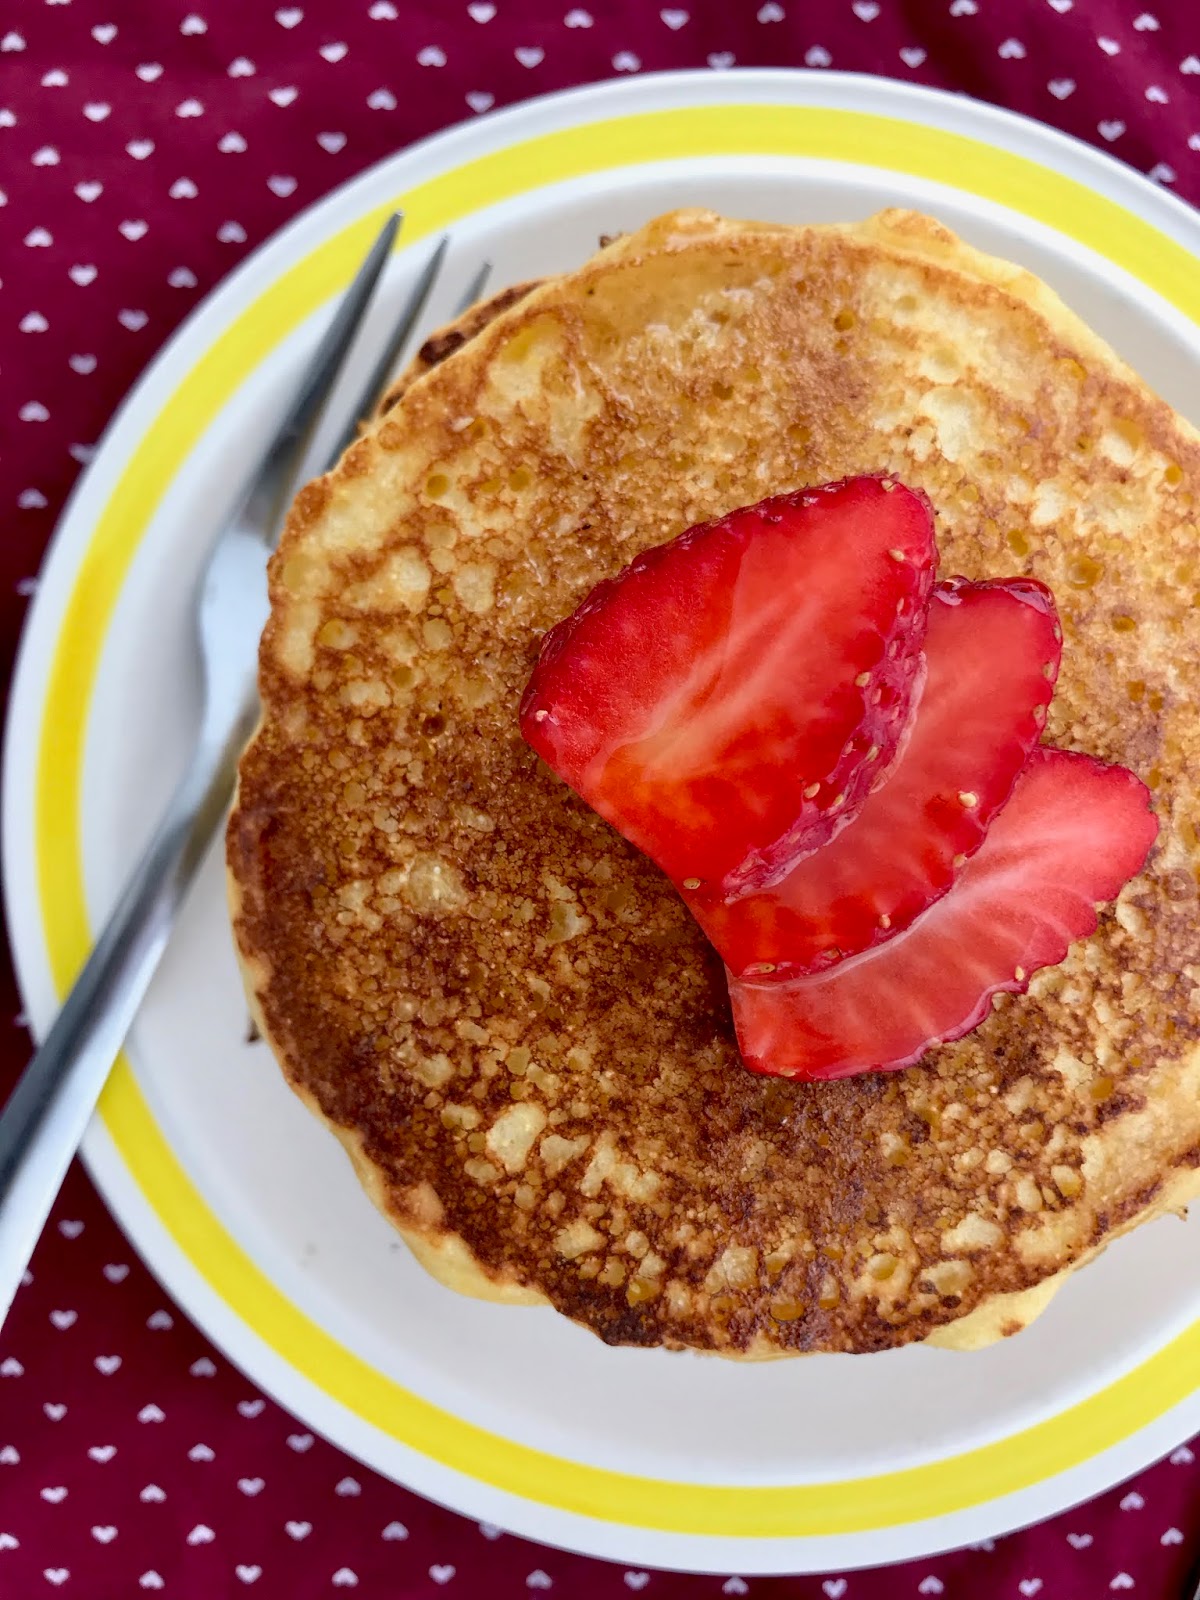 Old-fashioned cornmeal griddle cakes